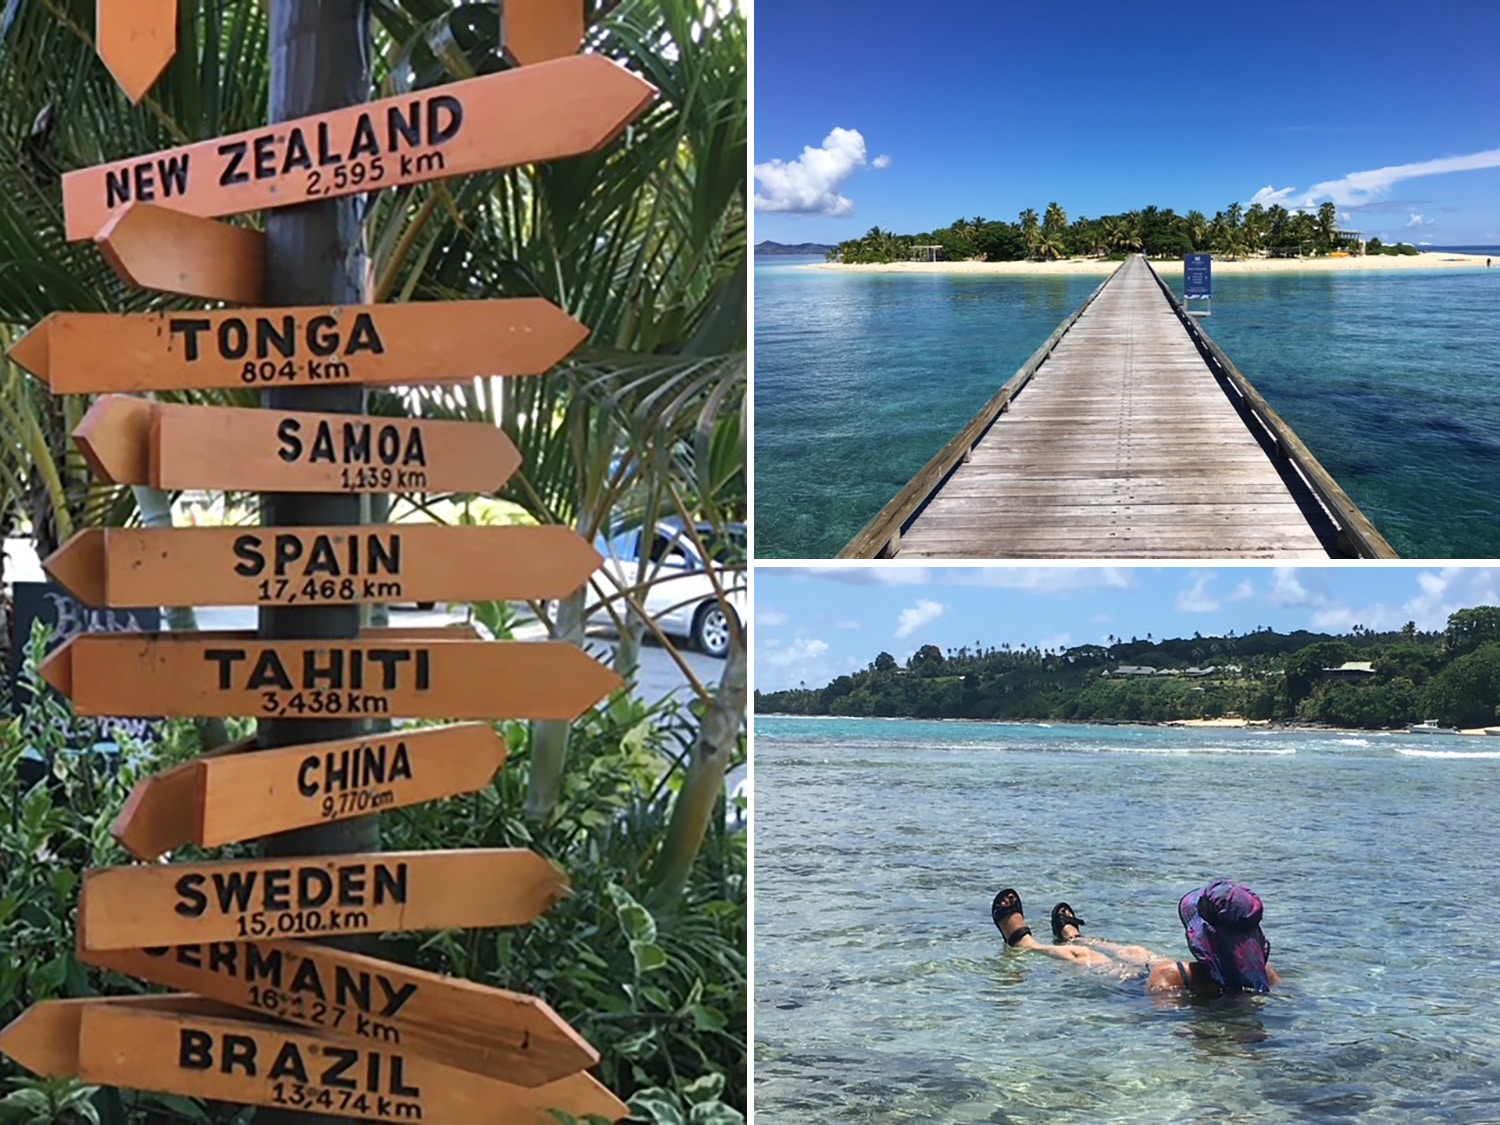 Sights from around Fiji, including snorkeling